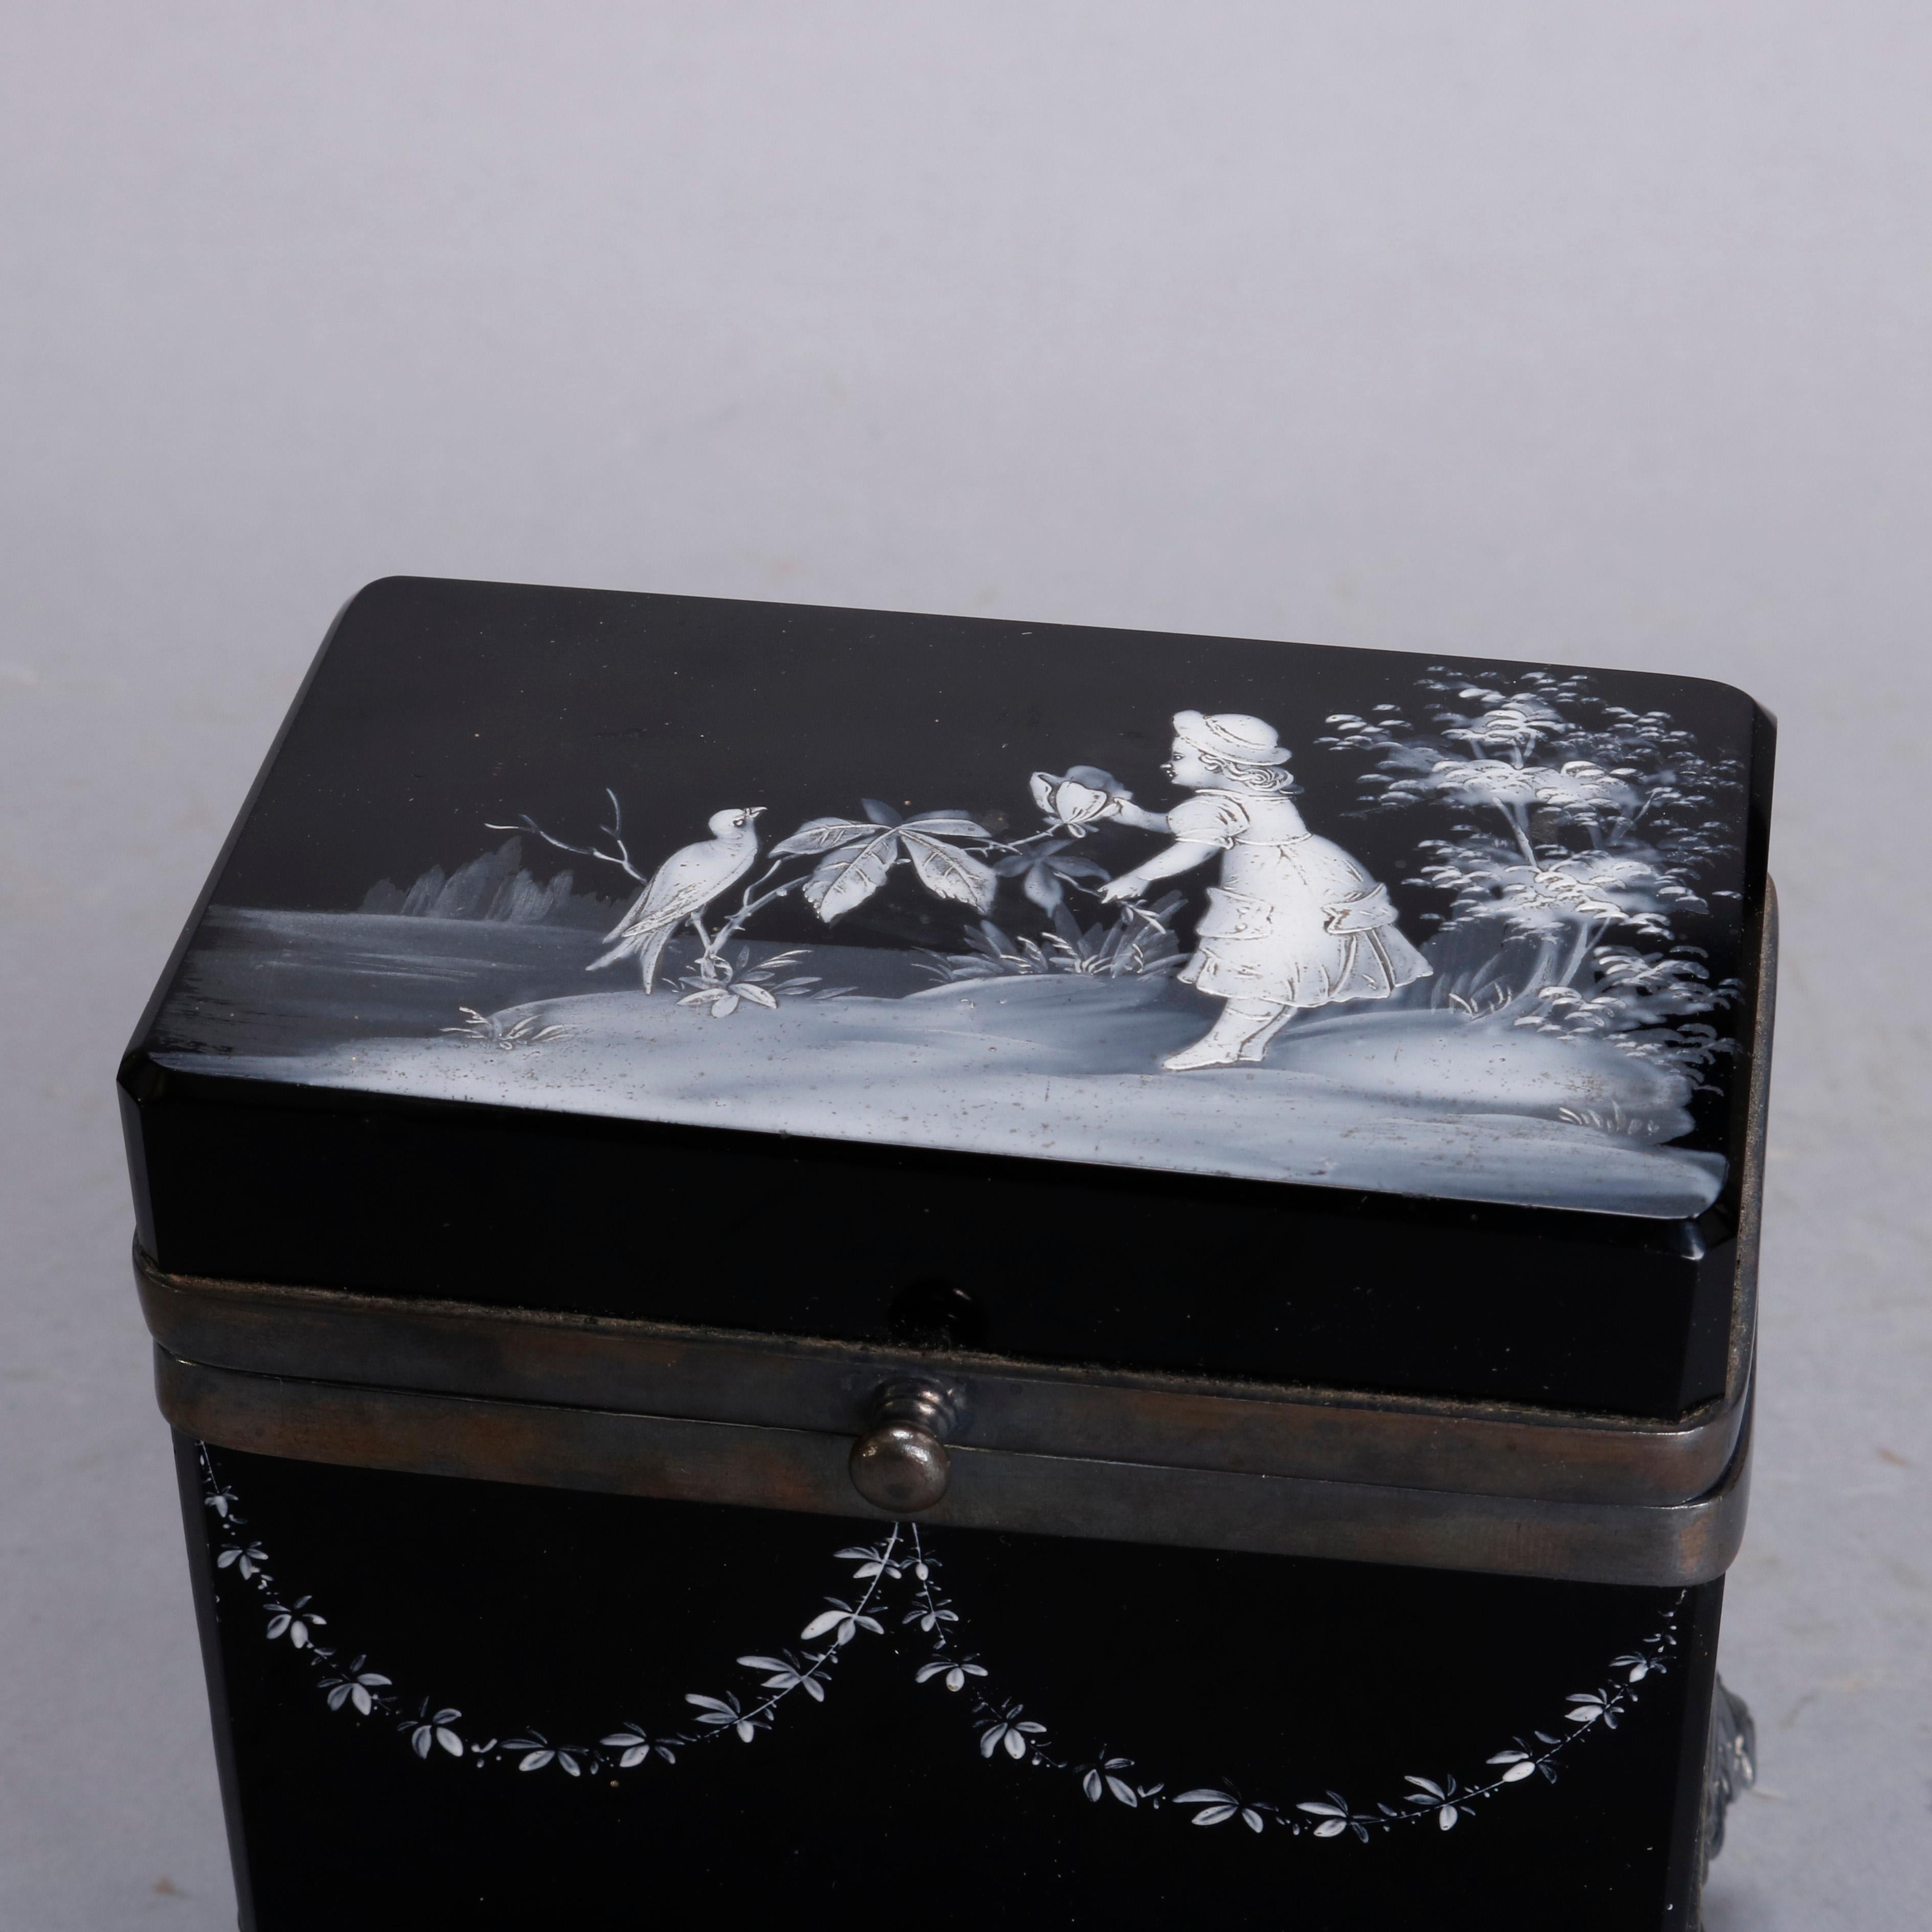 An antique Victorian Mary Gregory dresser box offers black amethyst glass box with top decorated with scene of young girl lakeside with bird, sides with floral garland, and seated on quadruple-plated hard metal footed base, circa 1890

Measures: